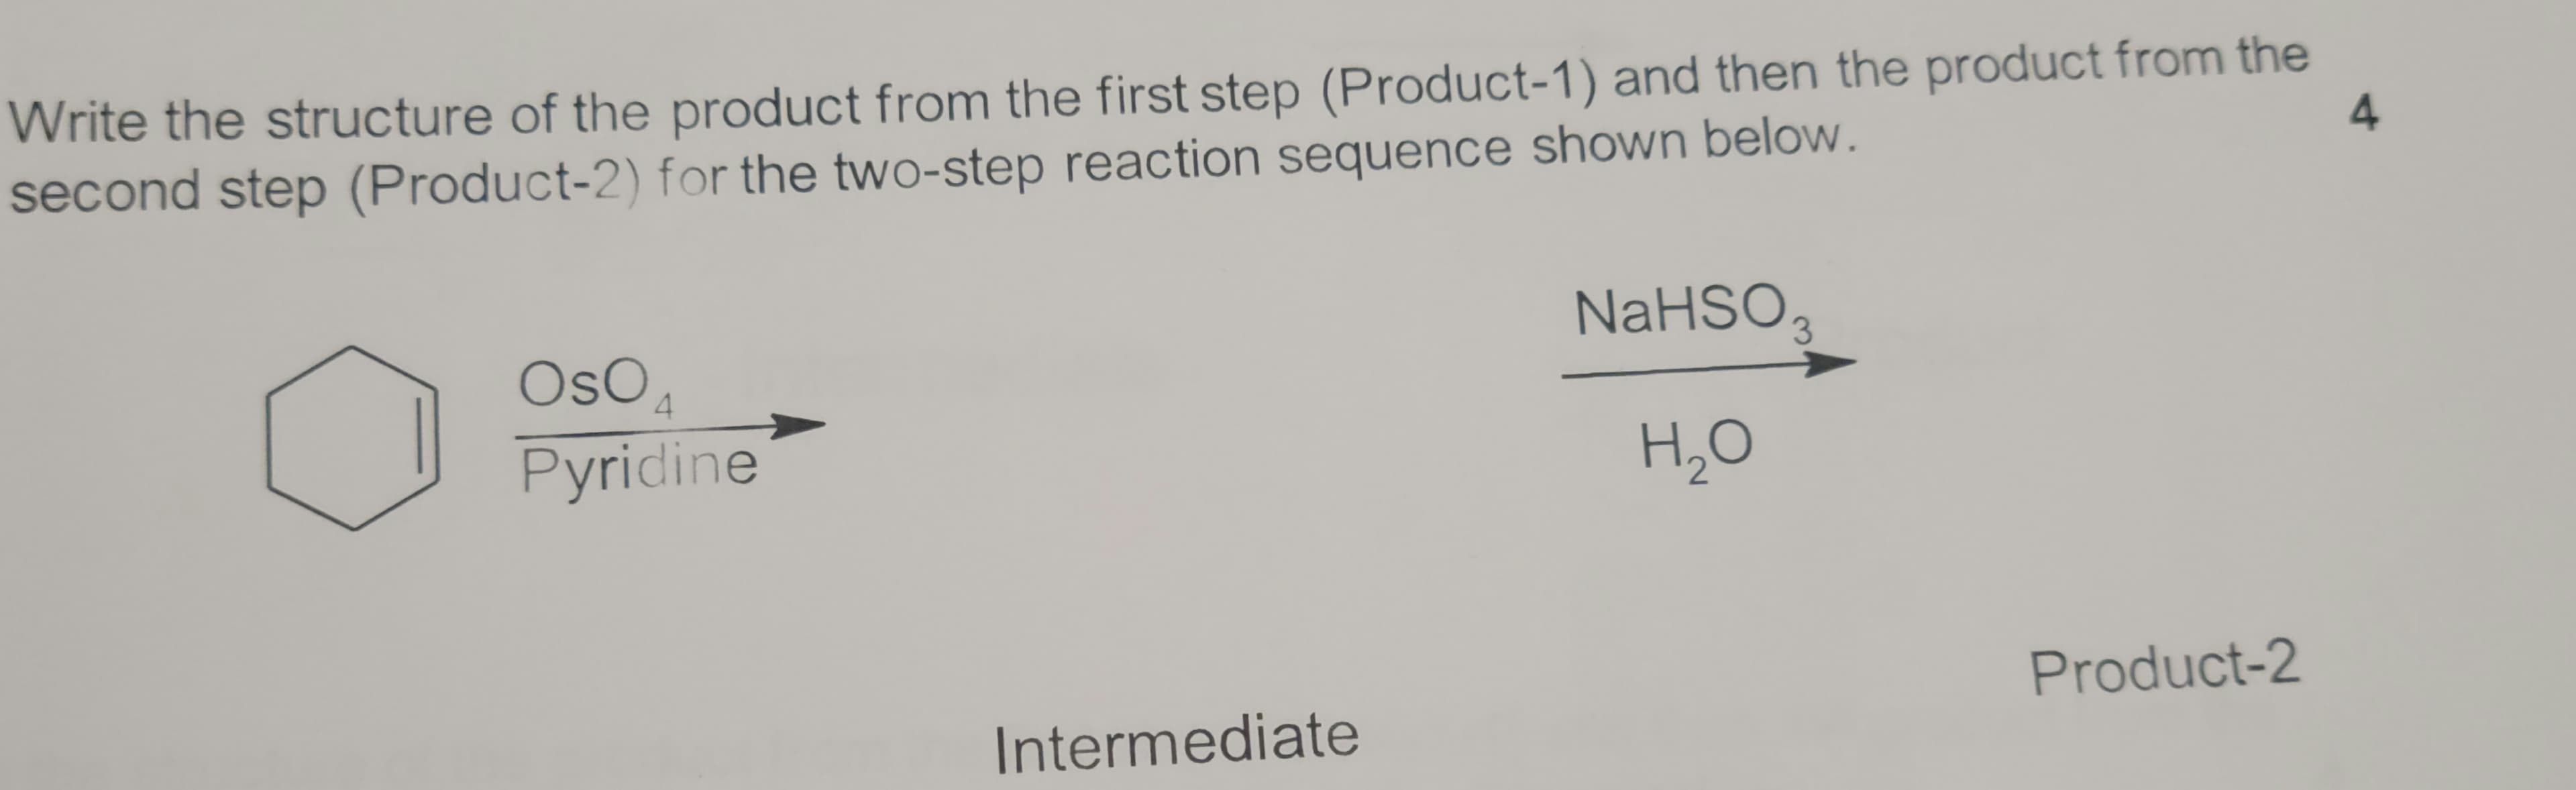 Write the structure of the product from the first step (Product-1) and then the product from the
second step (Product-2) for the two-step reaction sequence shown below.
NaHSO,
OsOA
4.
Pyridine
H,O
Product-2
Intermediate
